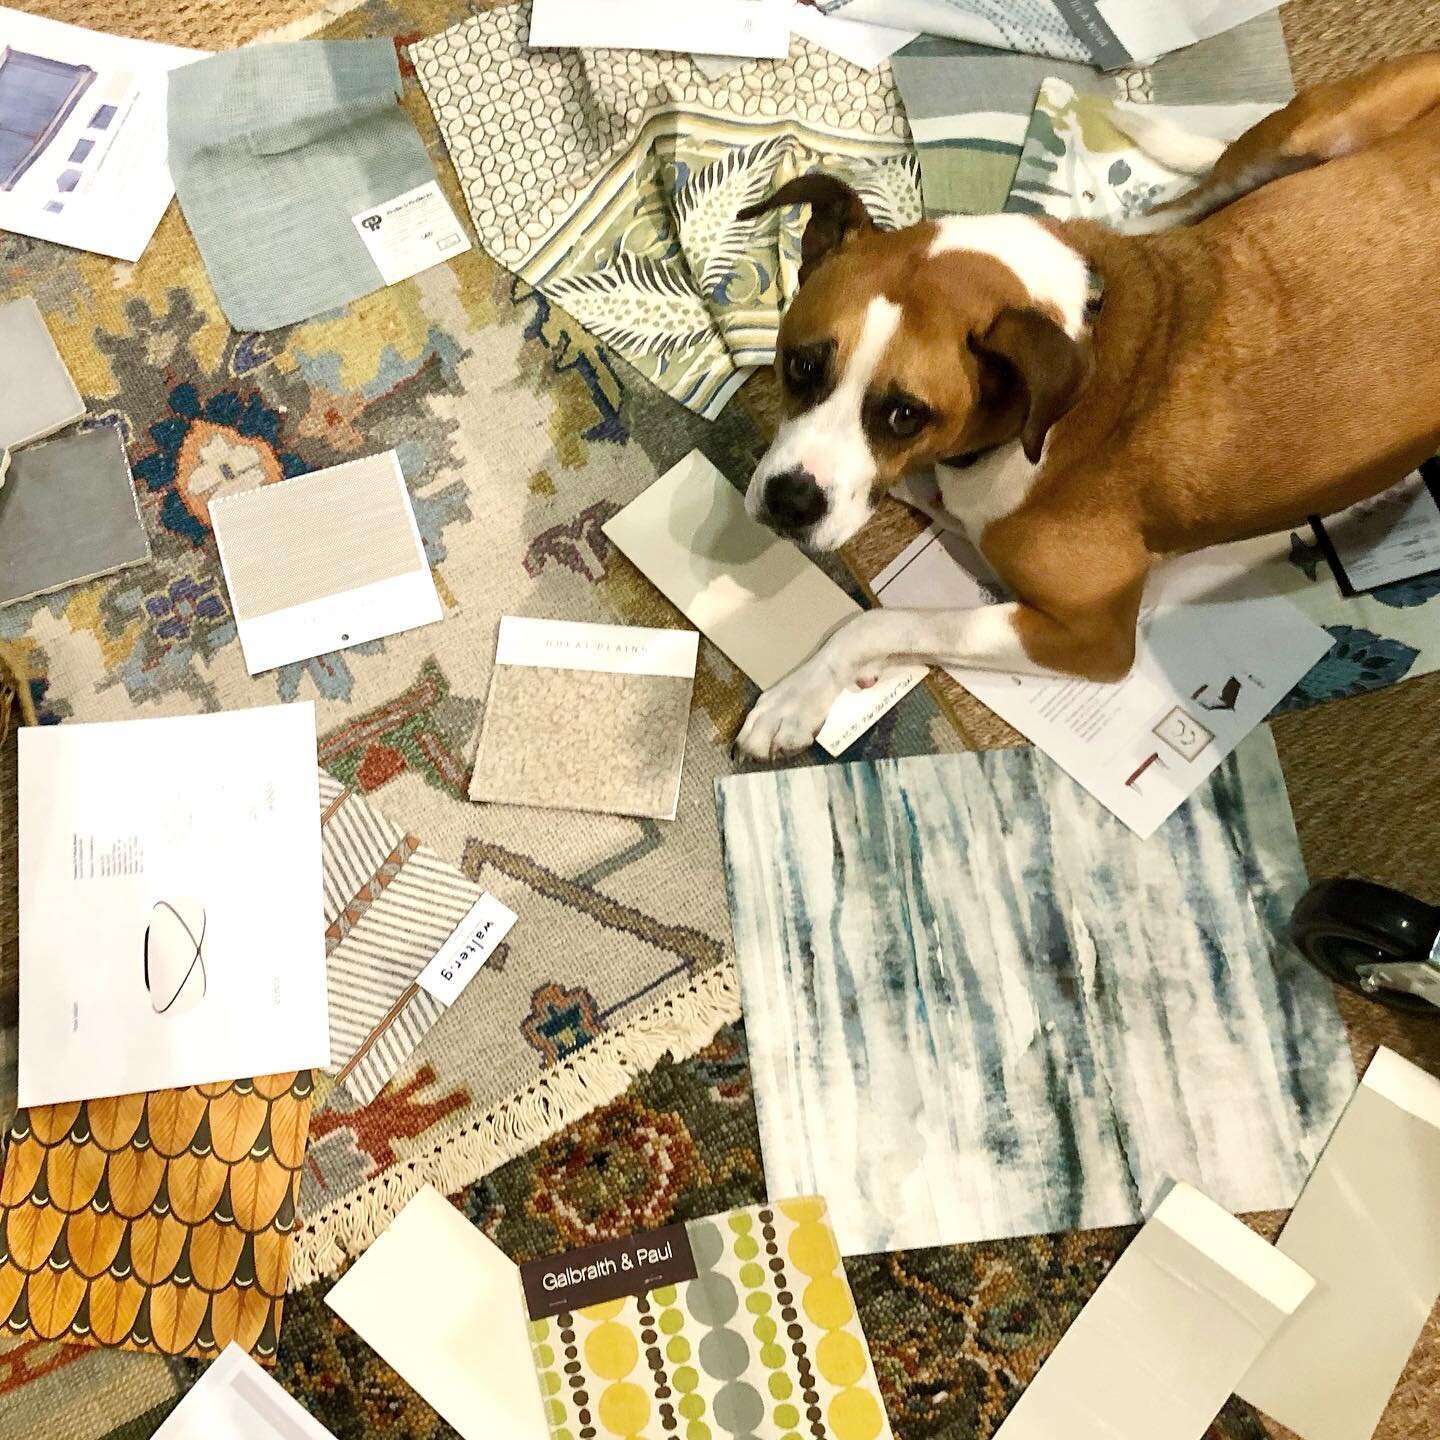 Our cute assistant helping concept a new project 🐶 🎨 💭 

#interiordesign #dogfriendly #concepting #homedesign